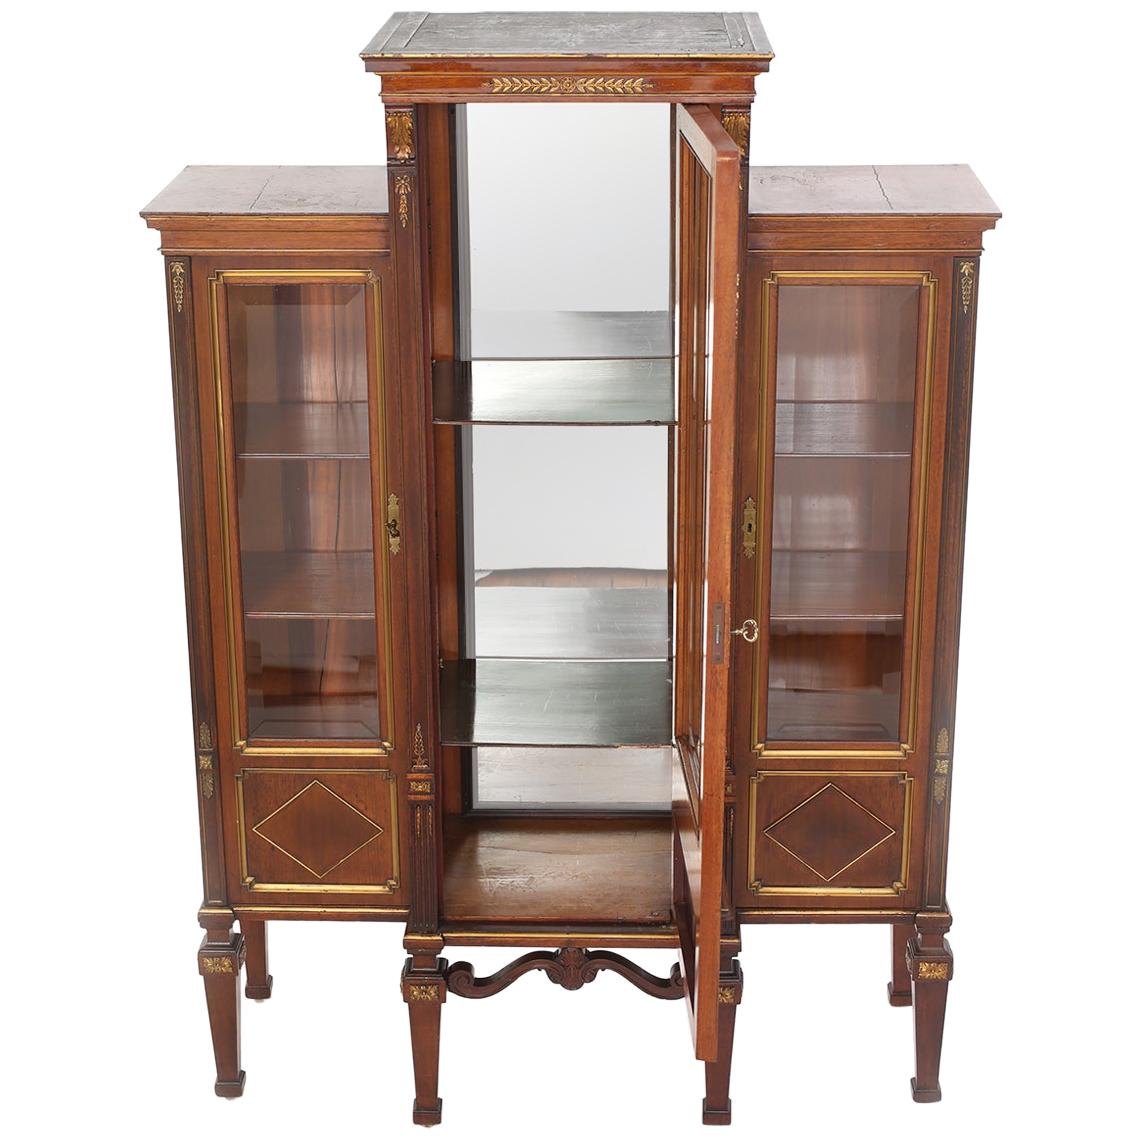 Early 19th Century Three Part French Display Cabinet